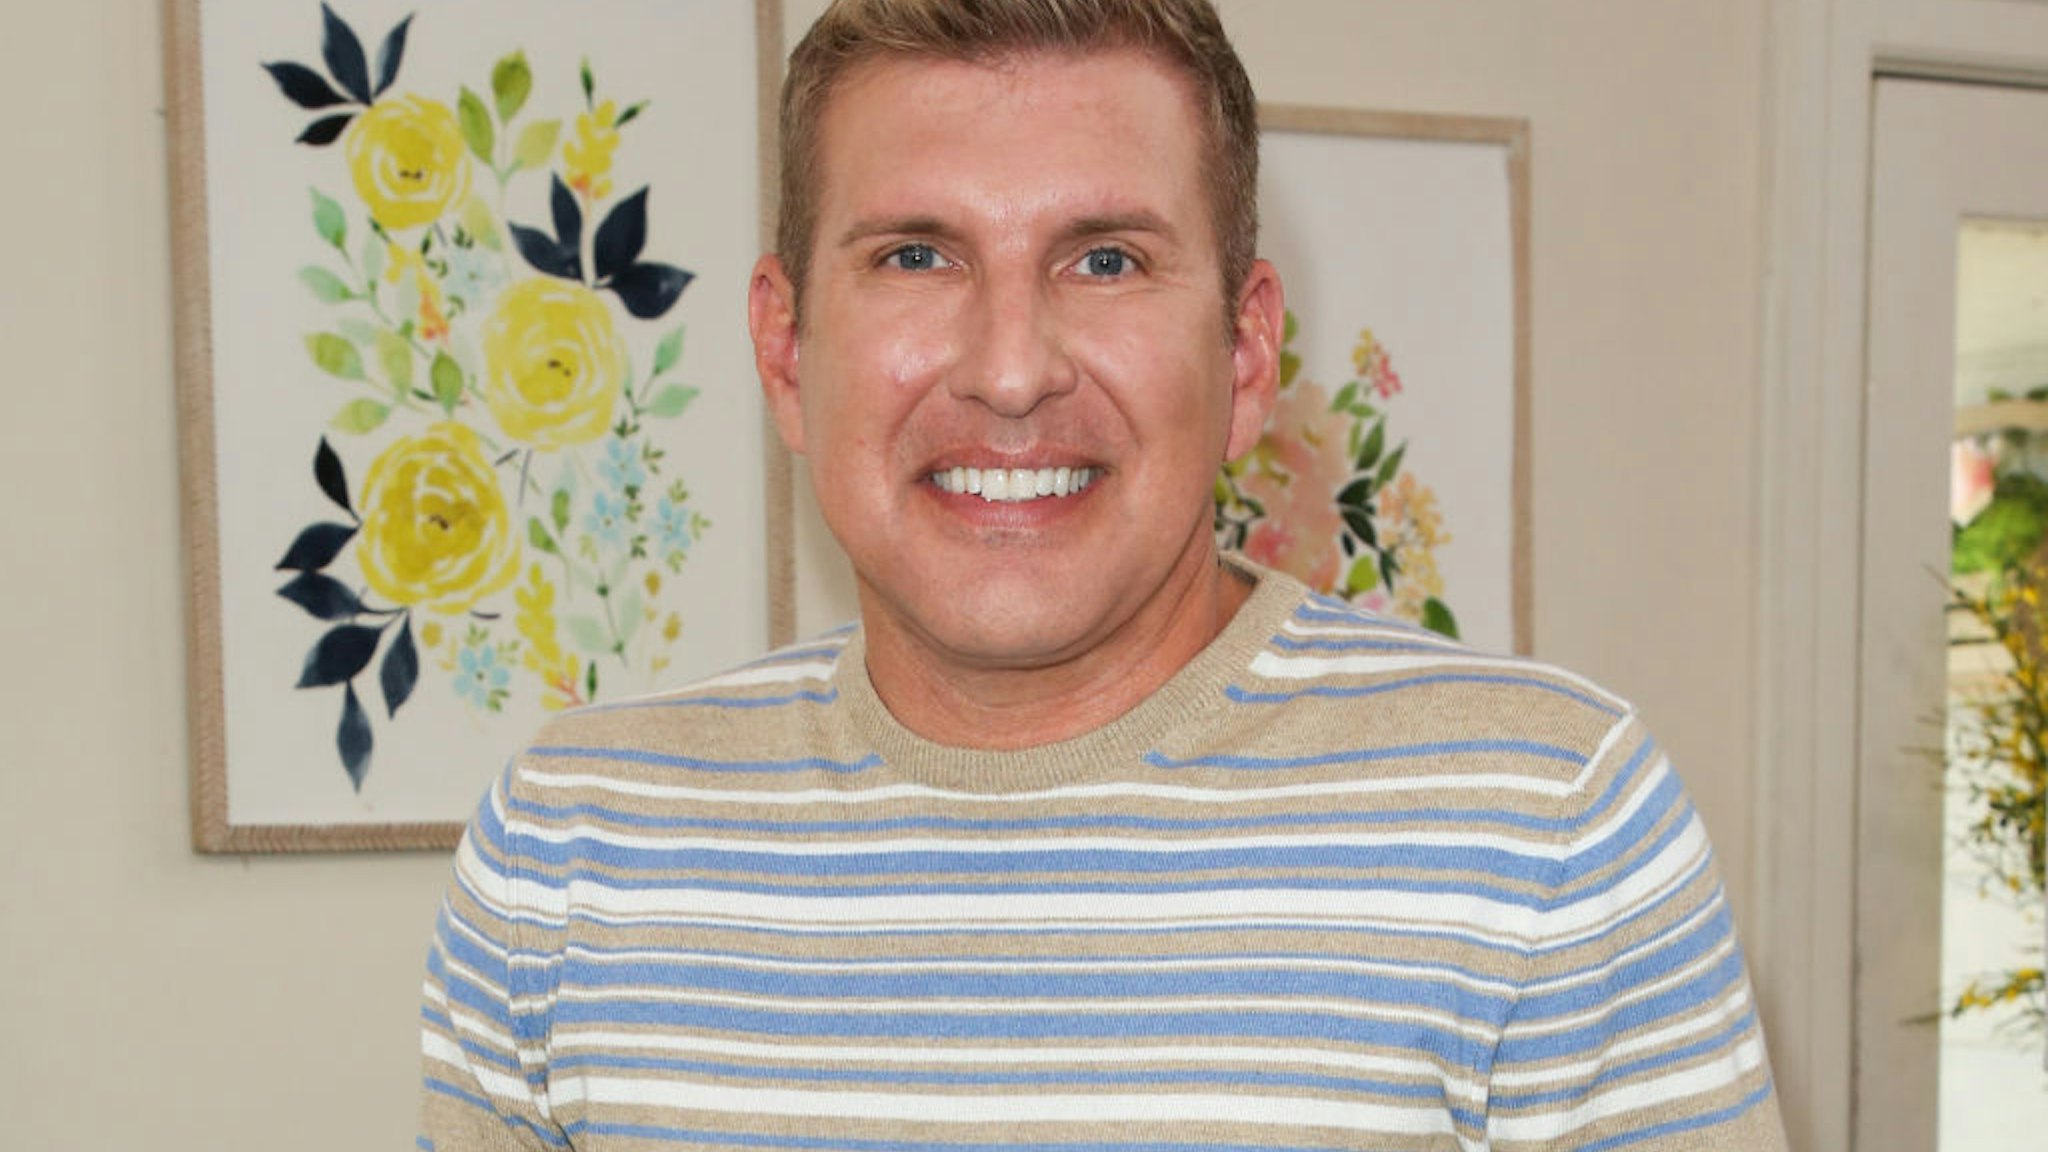 Reality TV Personality Todd Chrisley visit Hallmark's "Home & Family" at Universal Studios Hollywood on June 18, 2018 in Universal City, California.